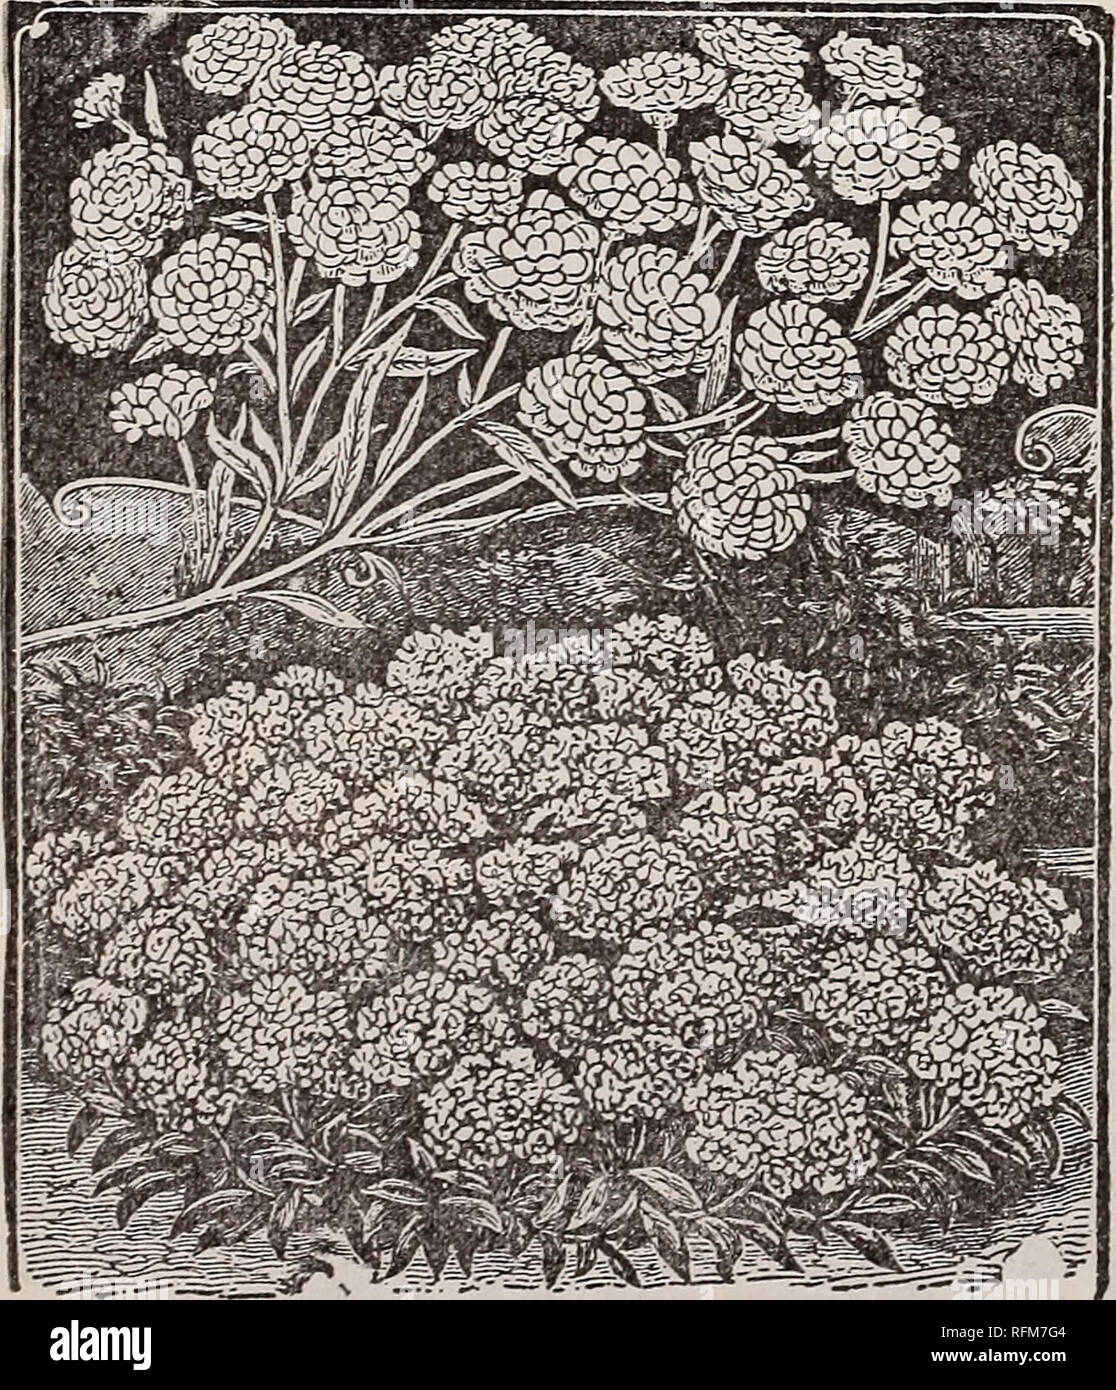 . The Geo. H. Mellen Co. : 1899. Nursery stock Ohio Catalogs; Bulbs (Plants) Catalogs; Flowers Seeds Catalogs; Plants, Ornamental Catalogs; Fruit Catalogs. Hyacinthus Candicans. HAKOY PERENJVIAIy PLANTS. ||New Achillea, THE PEARL. A hardy perennial, the top dying down to the ground every Winter. A plant will produce hundreds and even thousands of flowers the first Sum- mer, but when estab- lished the second year frequently have more than five hundred flowers on a plant at the same time. It commences to bloom early in July, is a per- fect mass of beautiful flowers till frost, the same bloom kee Stock Photo